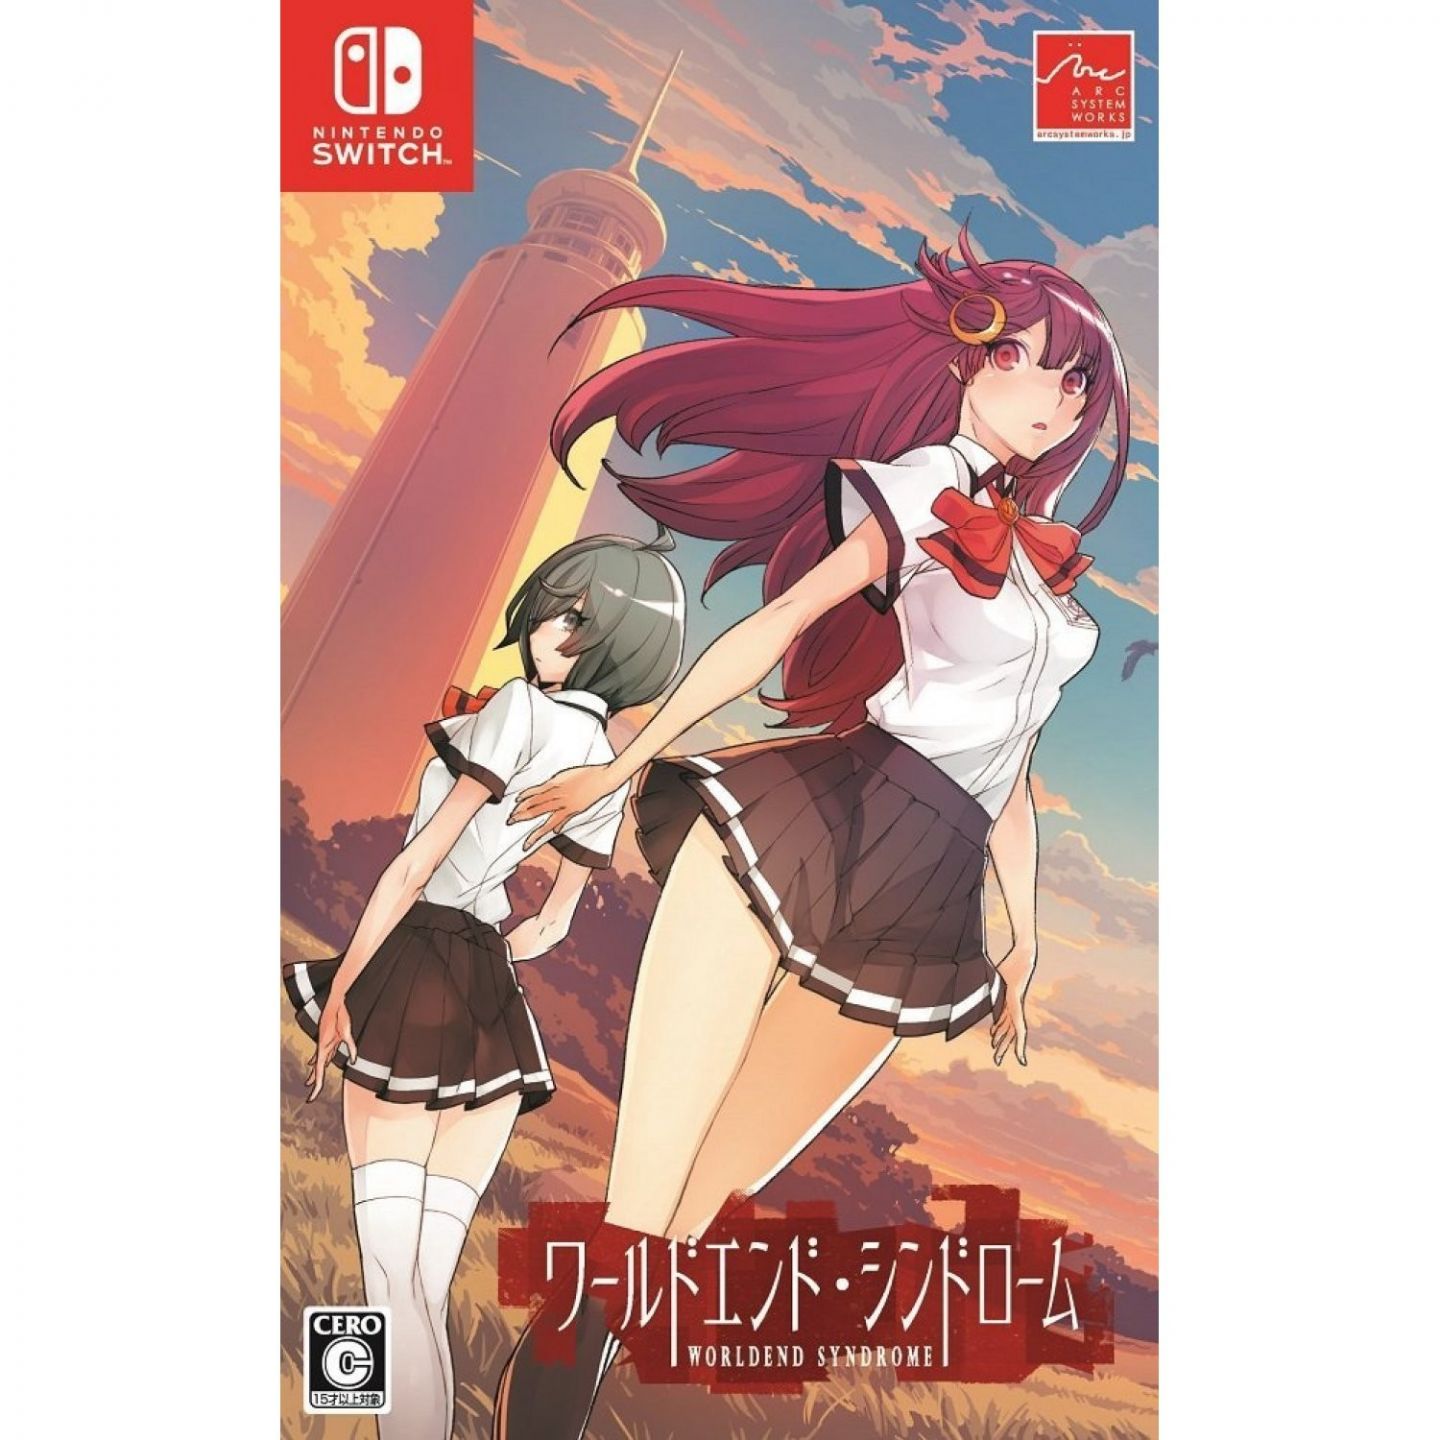 WorldEnd Syndrome Review (Nintendo Switch)